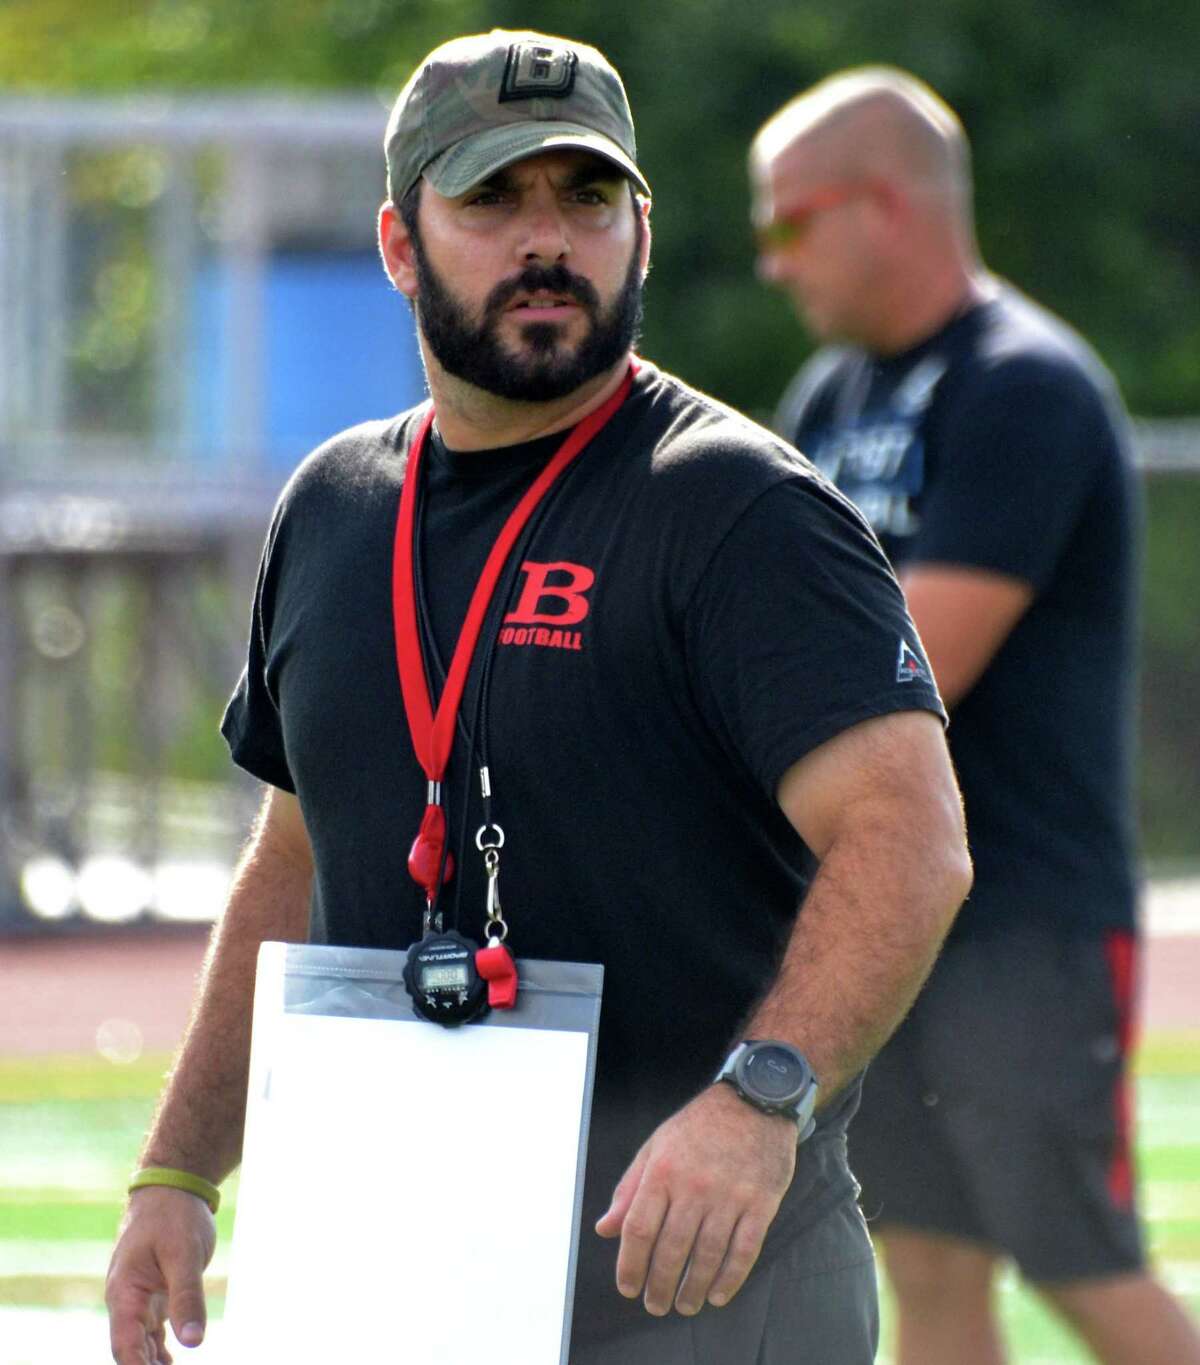 Branford coach John Limone during practice on Wednesday, Sept. 19, 2018. (Pete Paguaga, Hearst Connecticut Media)